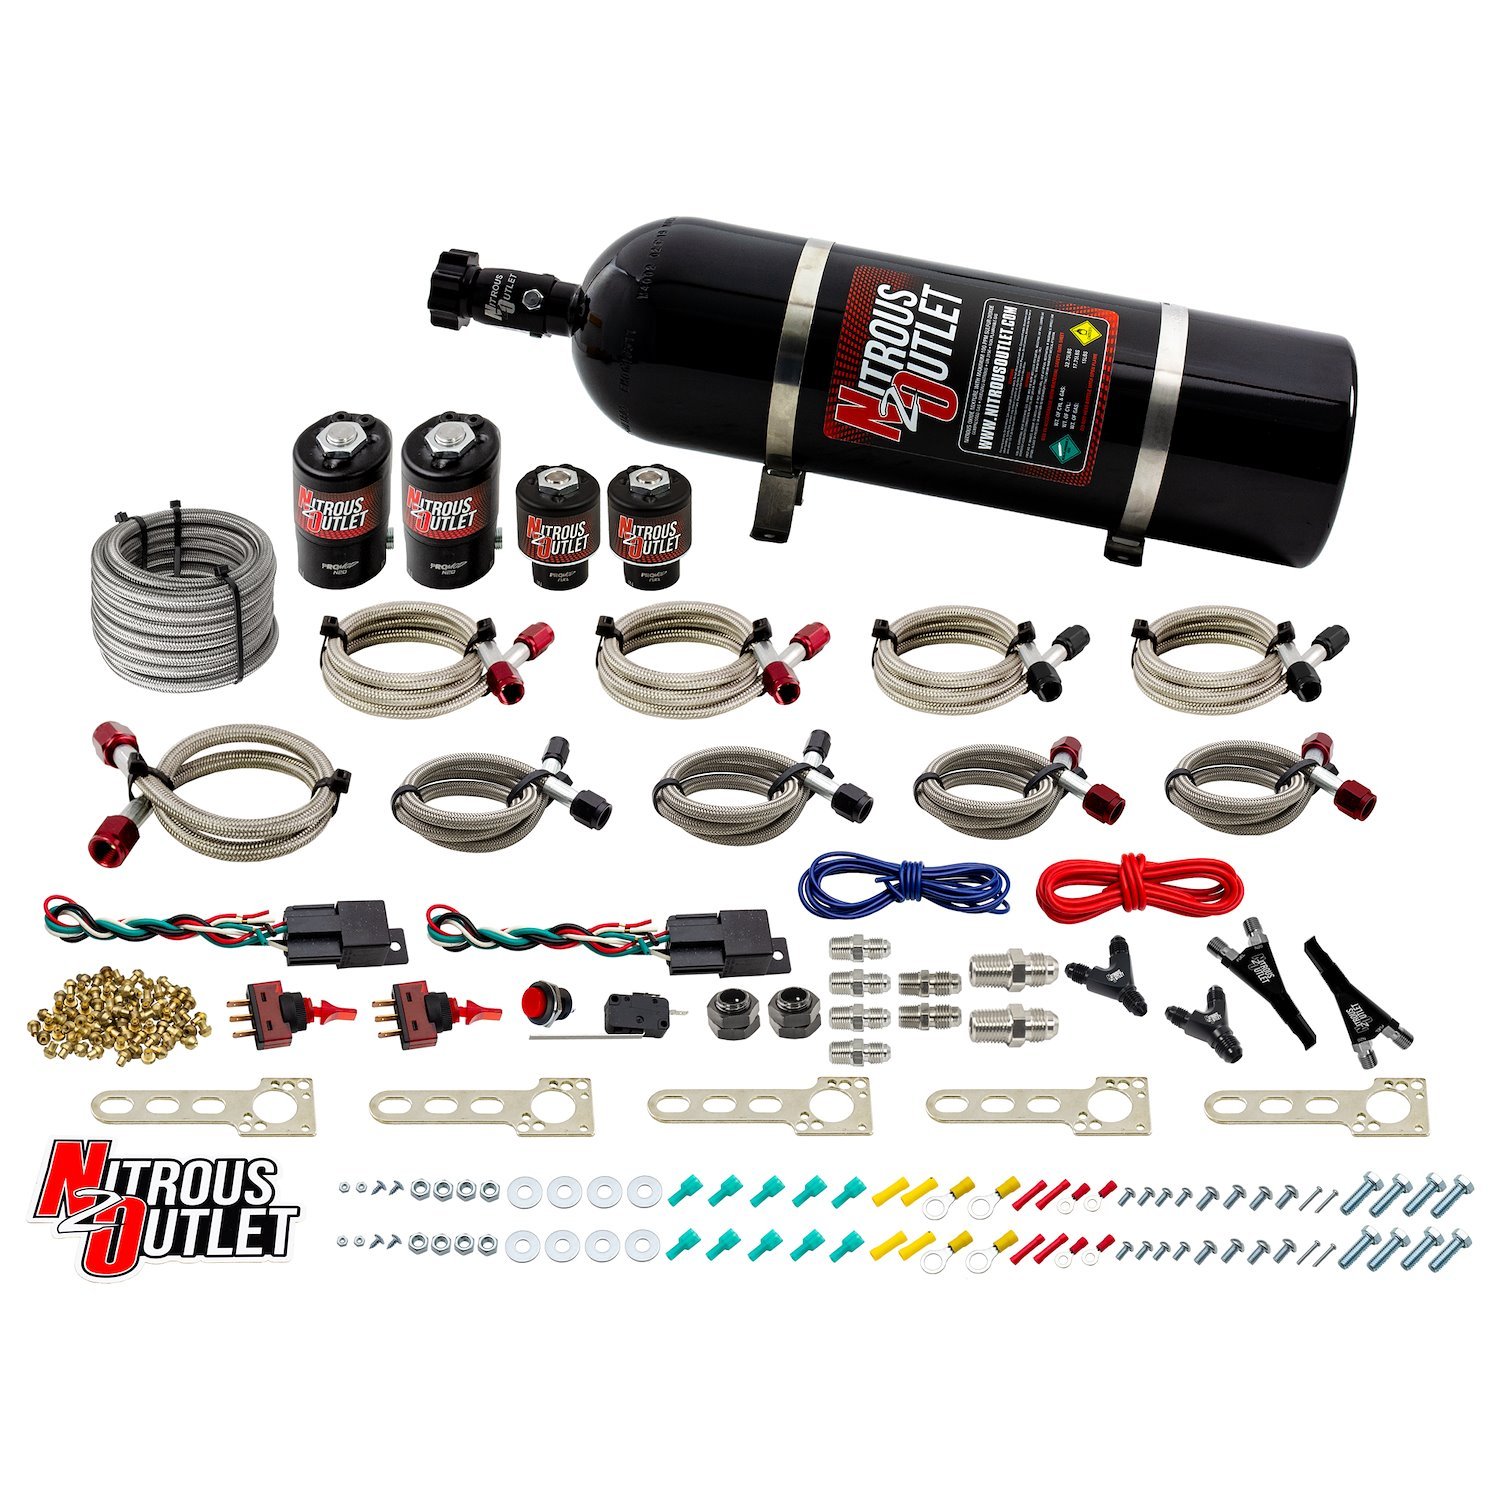 00-10013-15 Ford EFI Dual-Stage Single-Nozzle System, Gas/E85, 5-55psi, 35-200HP, 15lb Bottle